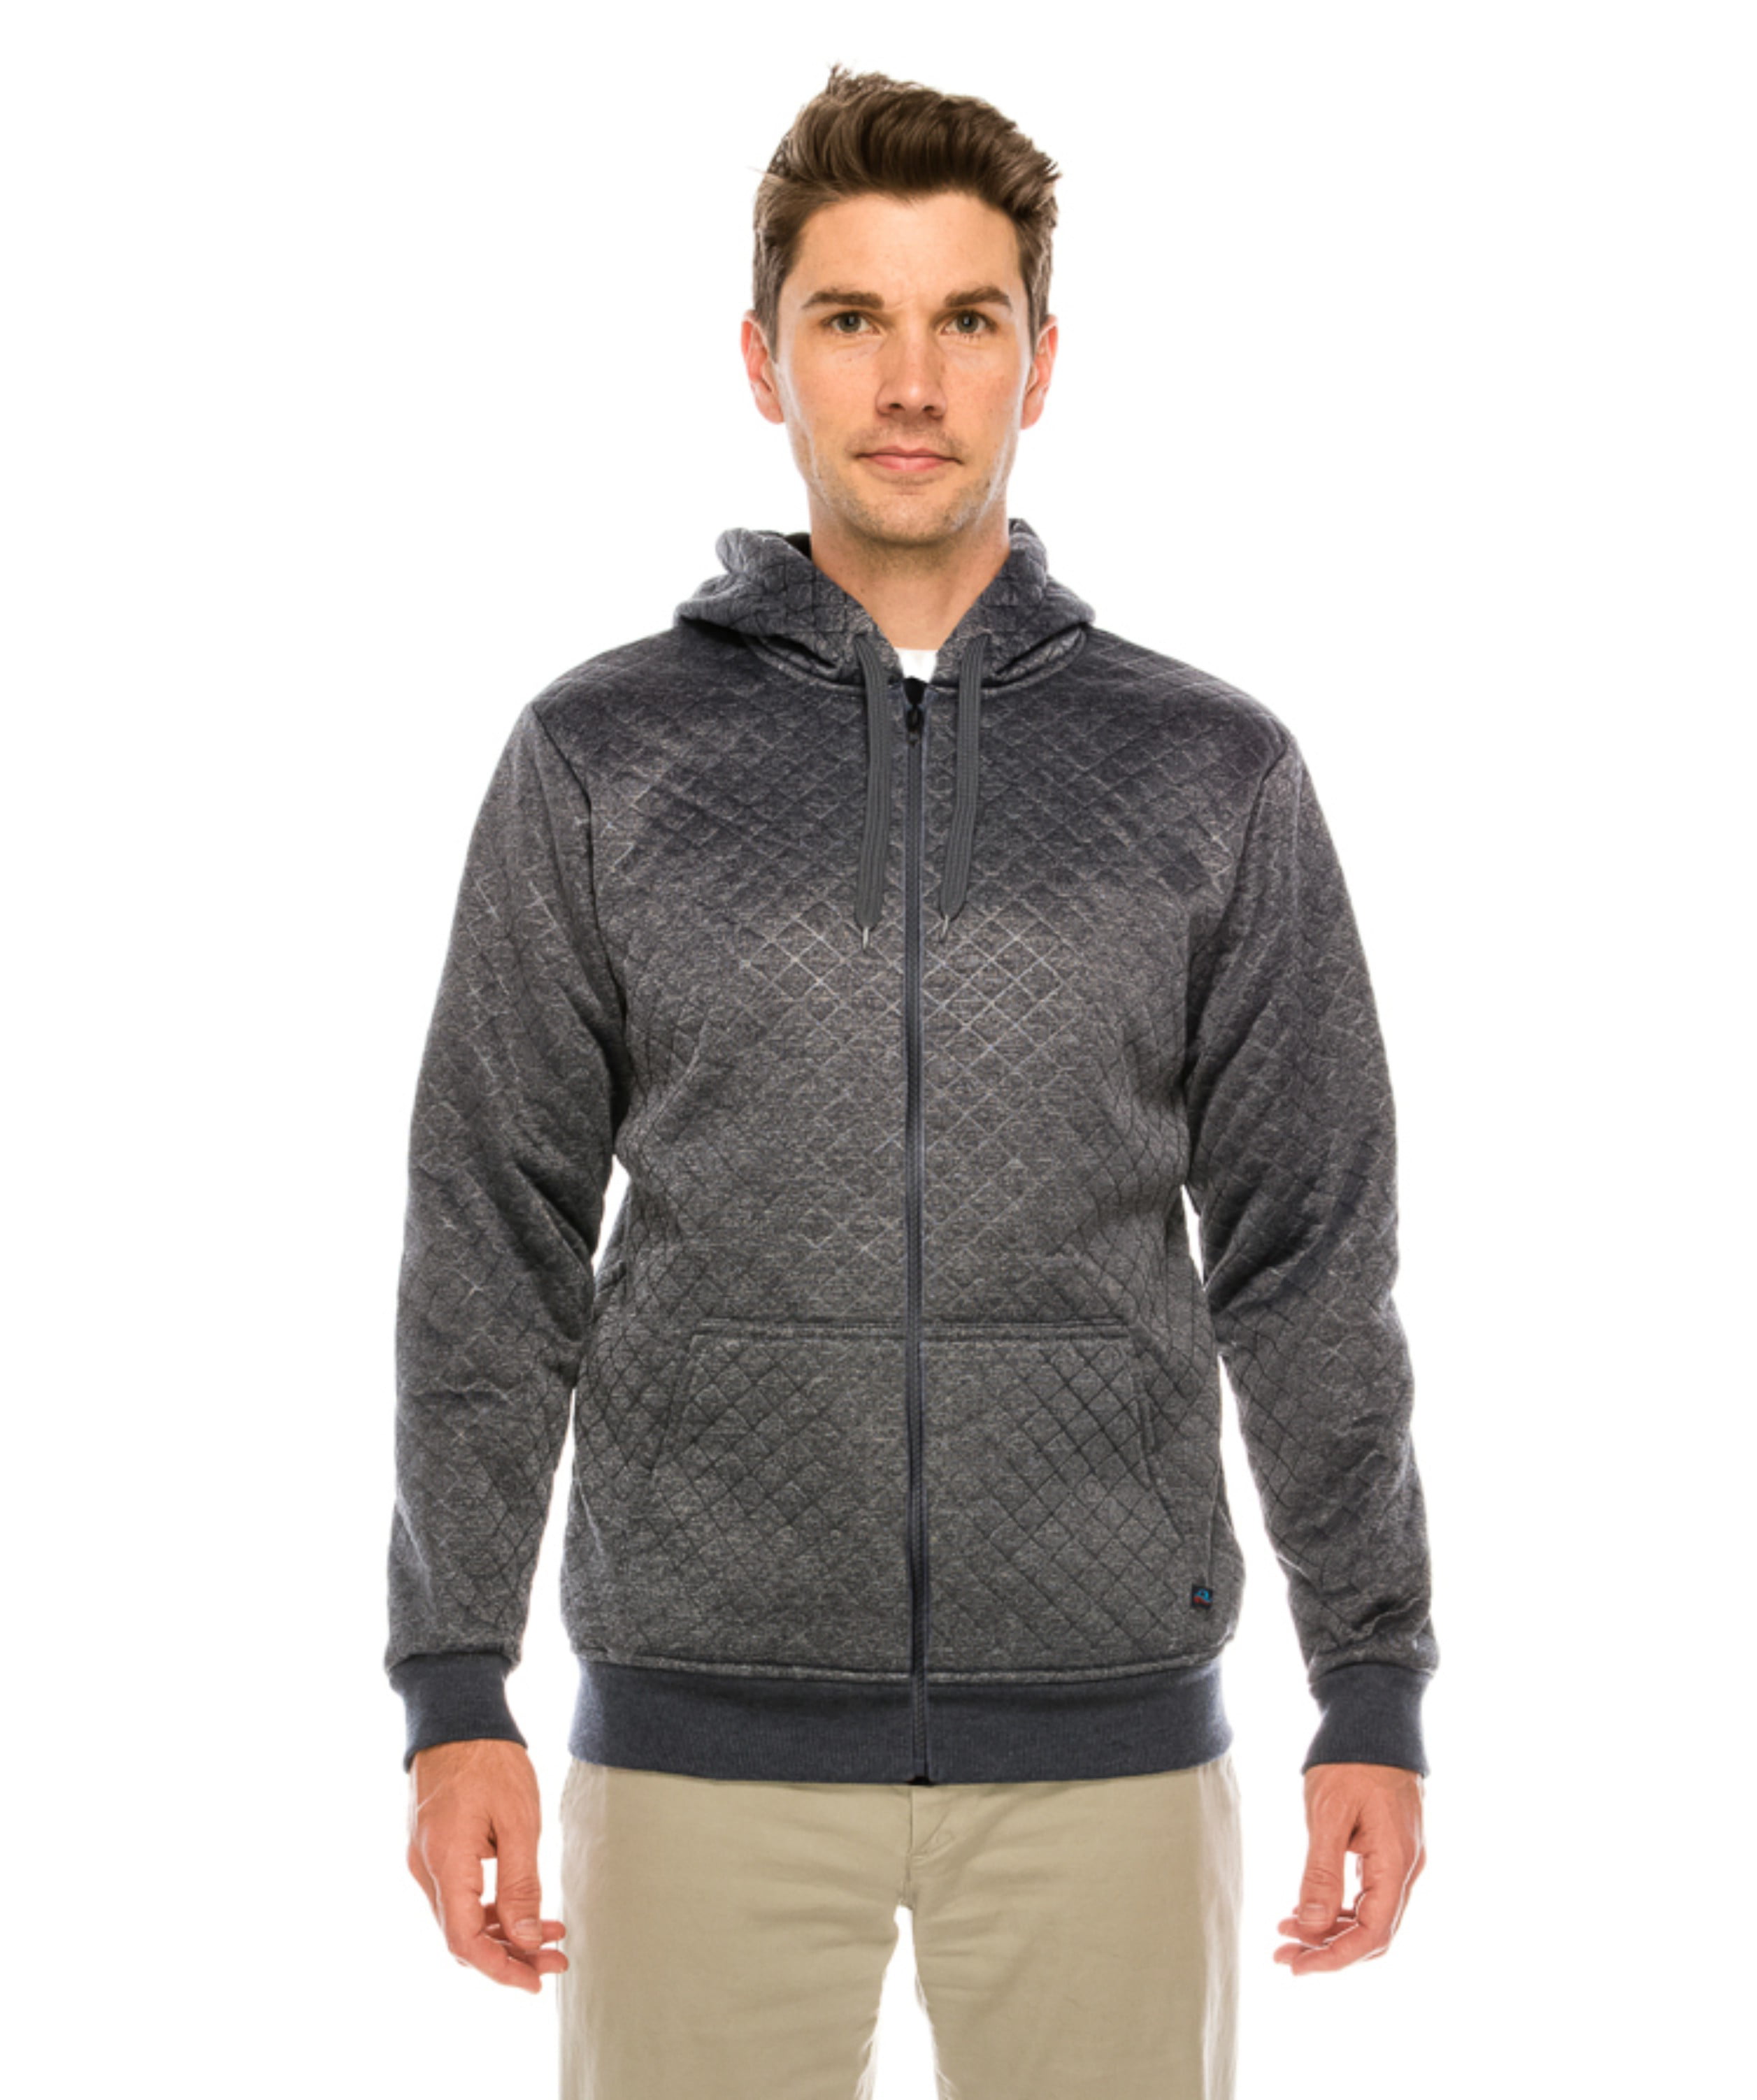 Men's Quilted Hoodie with Zipper and Drawstring - Walmart.com